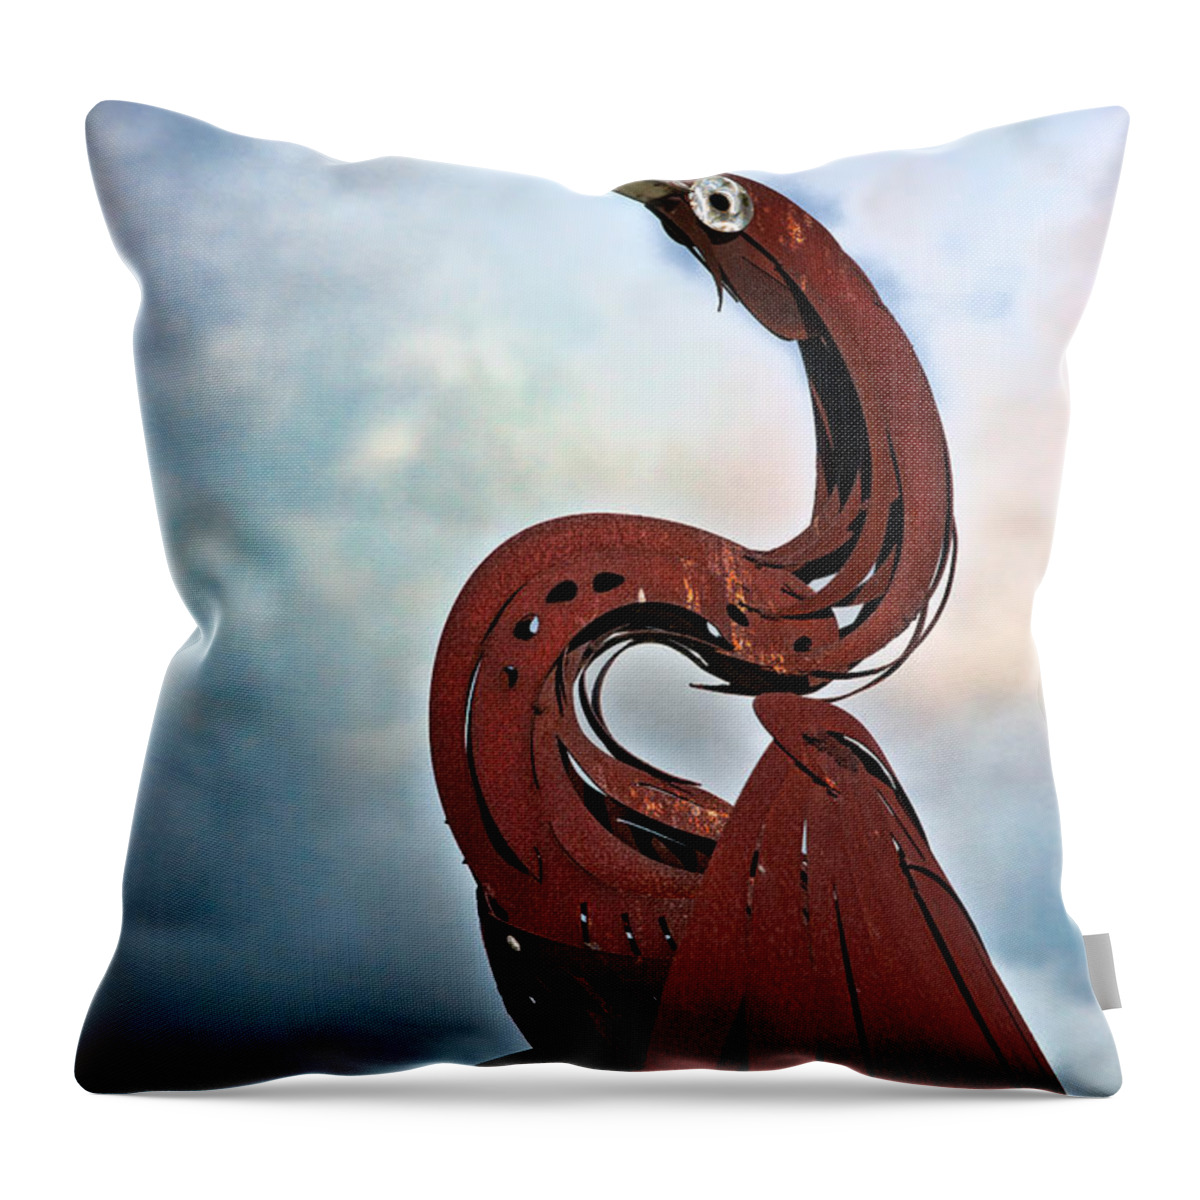 Egret Throw Pillow featuring the photograph Egret Under Stormy Skies by Christopher Holmes